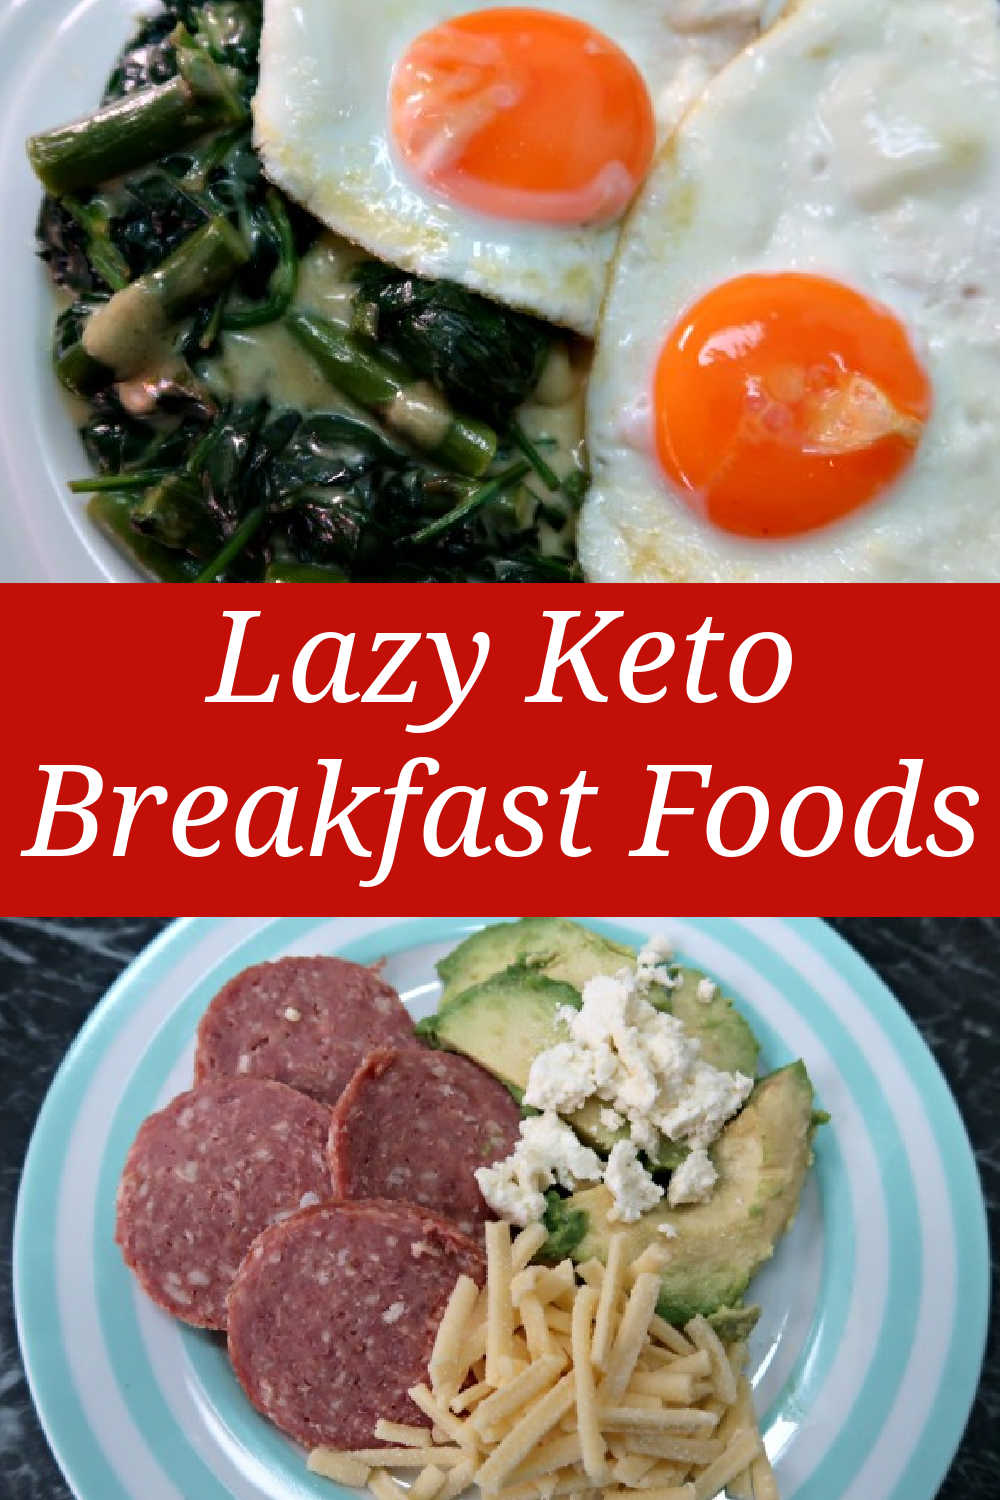 Lazy Keto Breakfast Foods - The Best Easy recipes, meals and ideas for delicious low carb breakfasts that are ketogenic diet friendly.